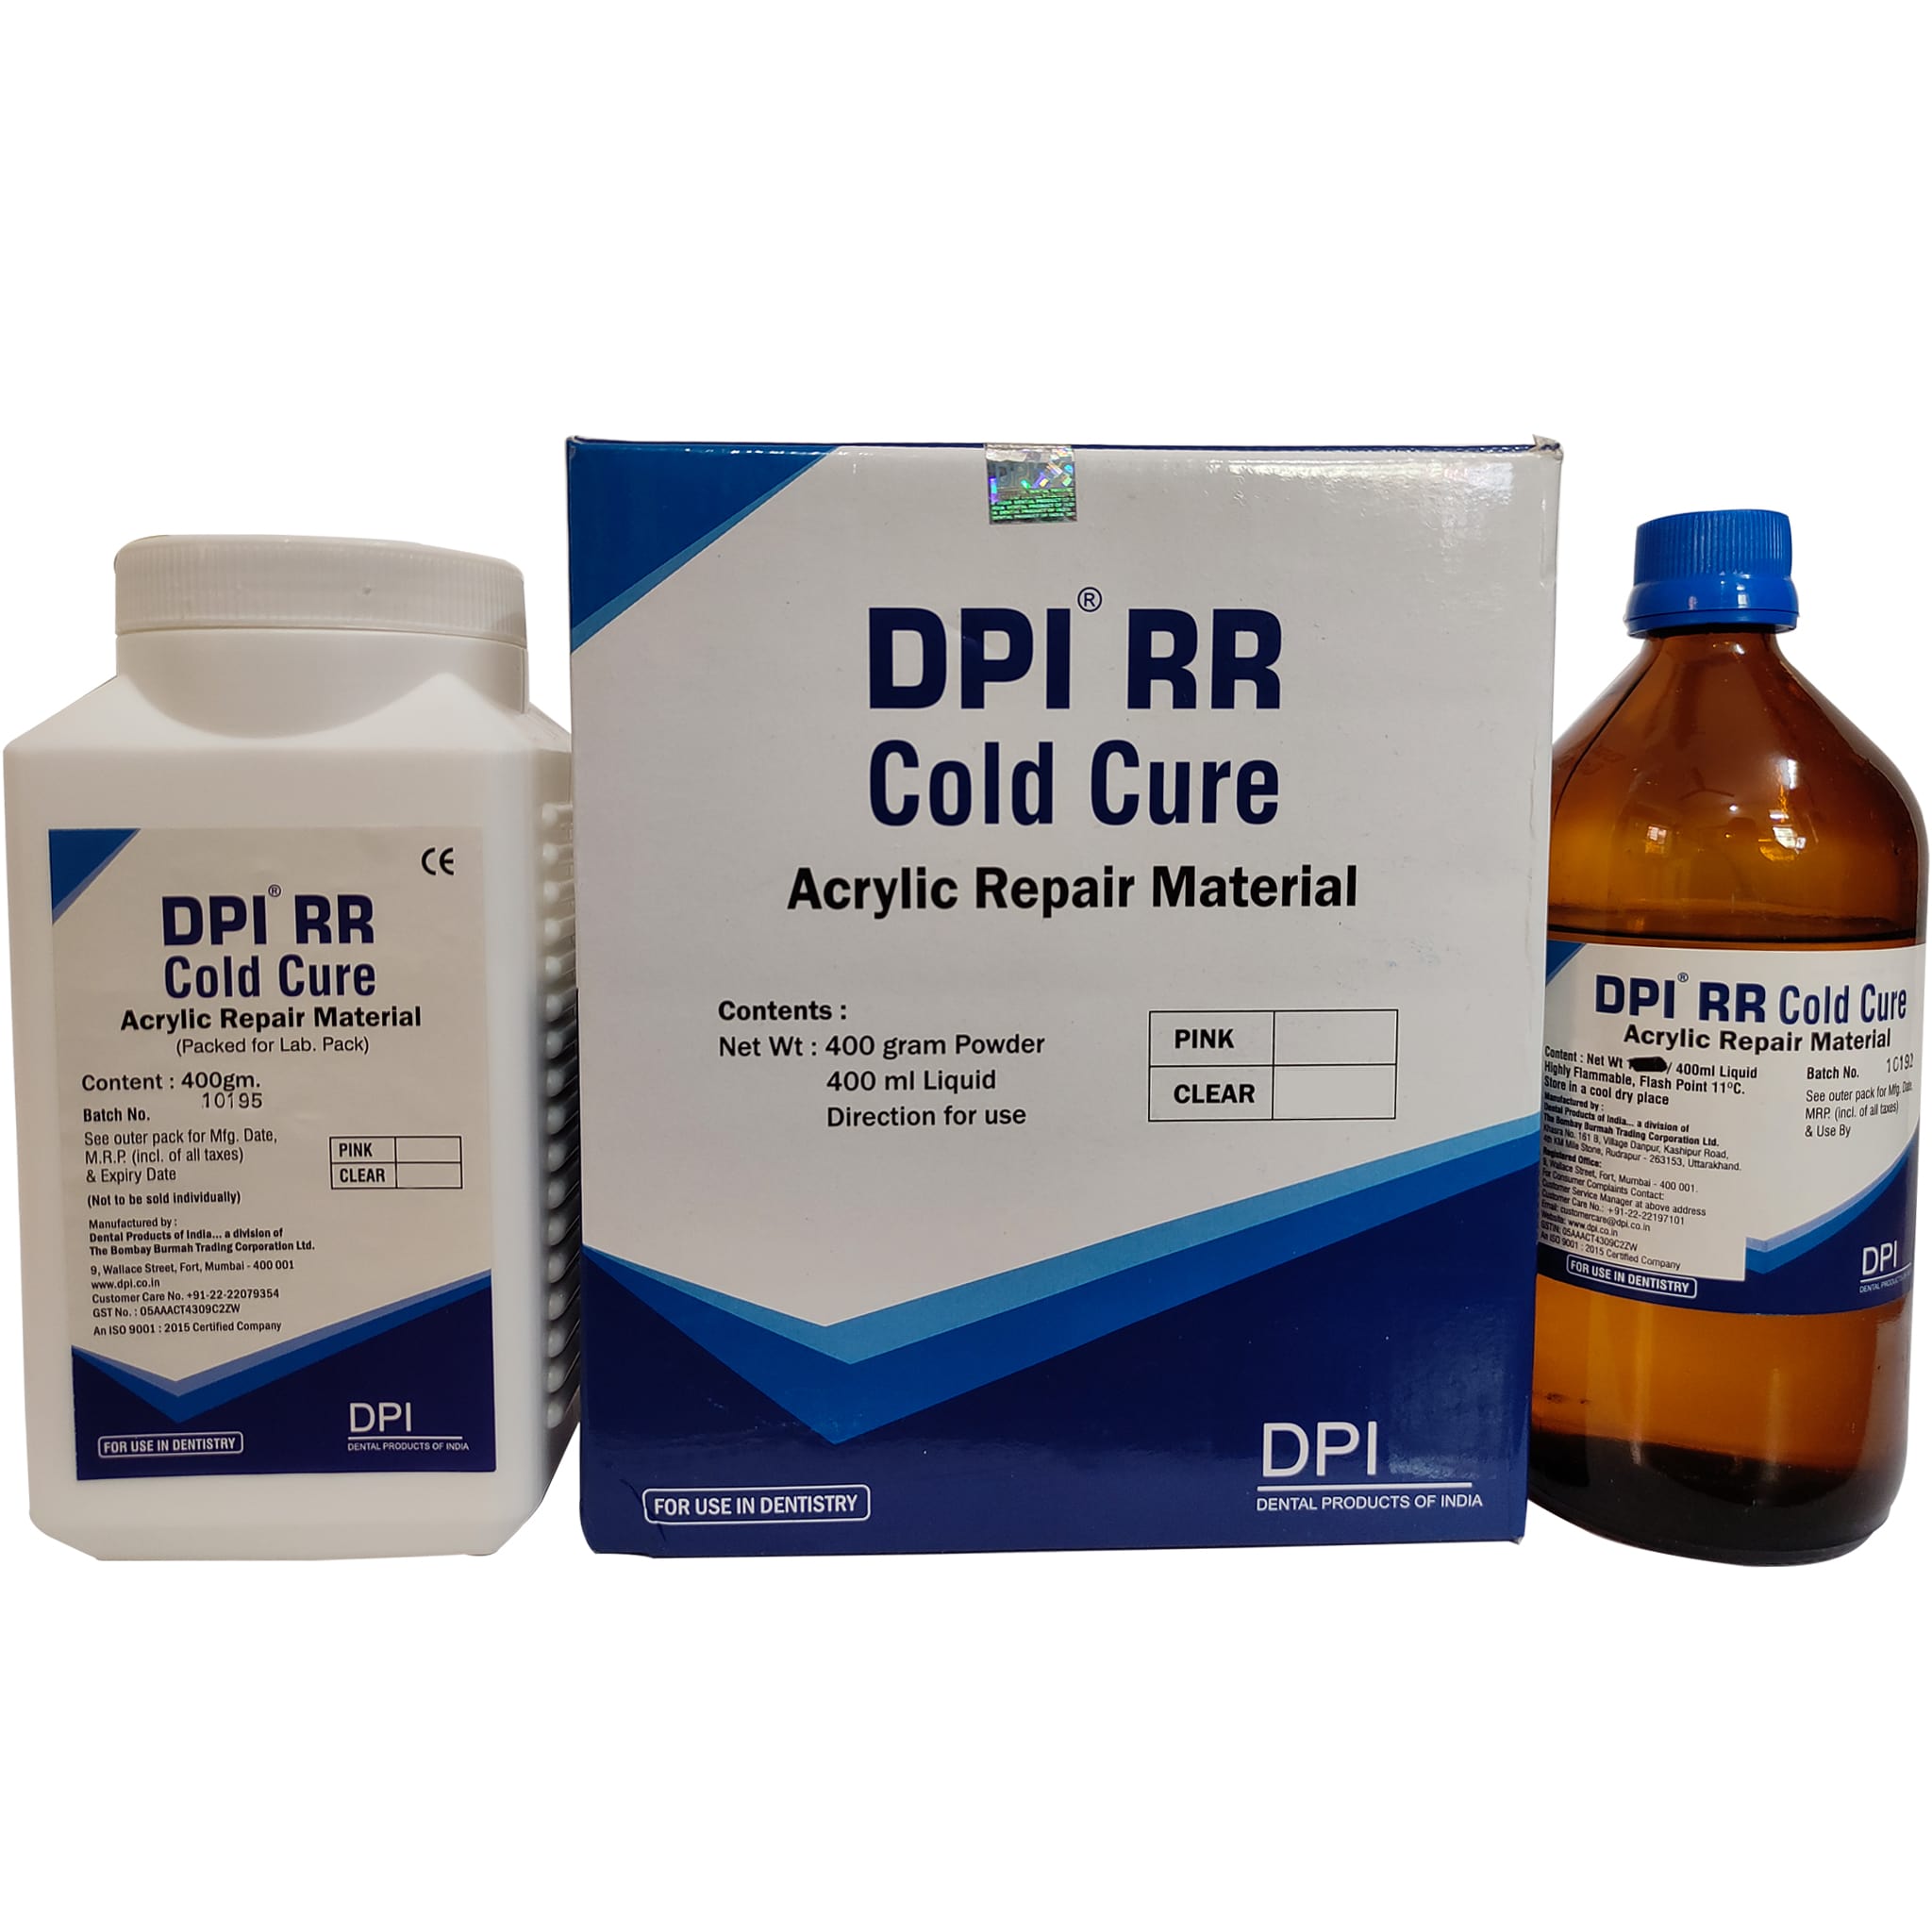 DPI RR Cold Cure Lab Pack